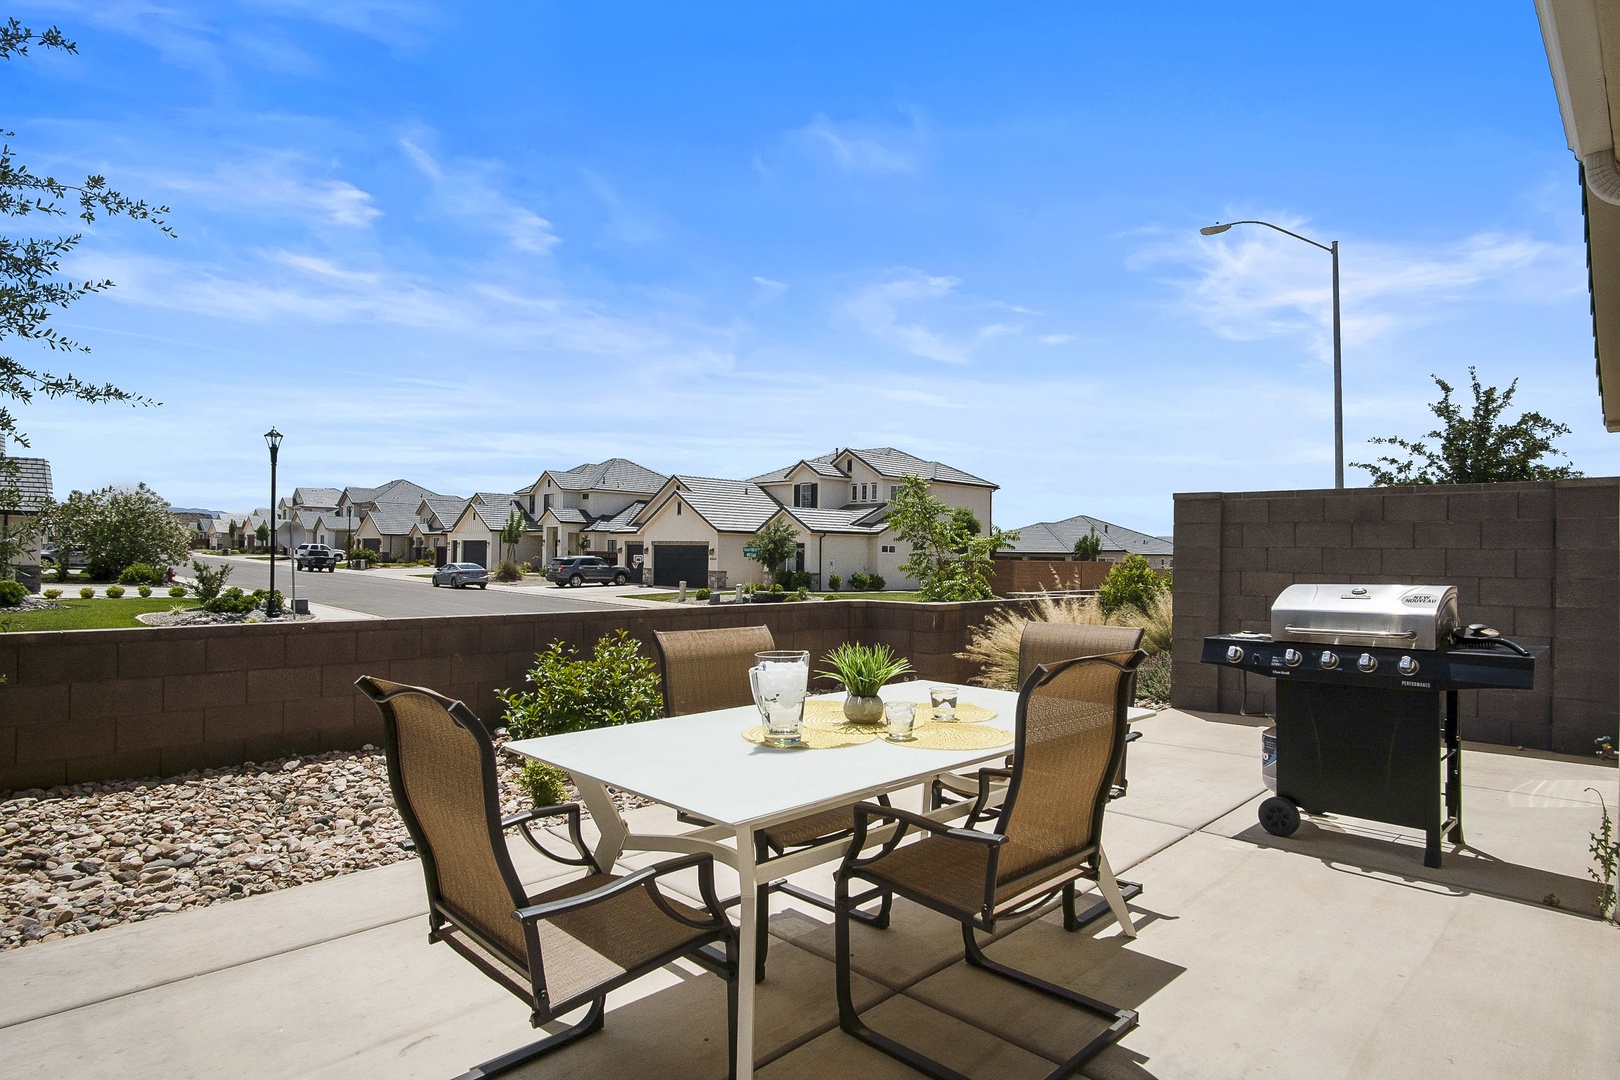 Outdoor dining with seating and BBQ grill